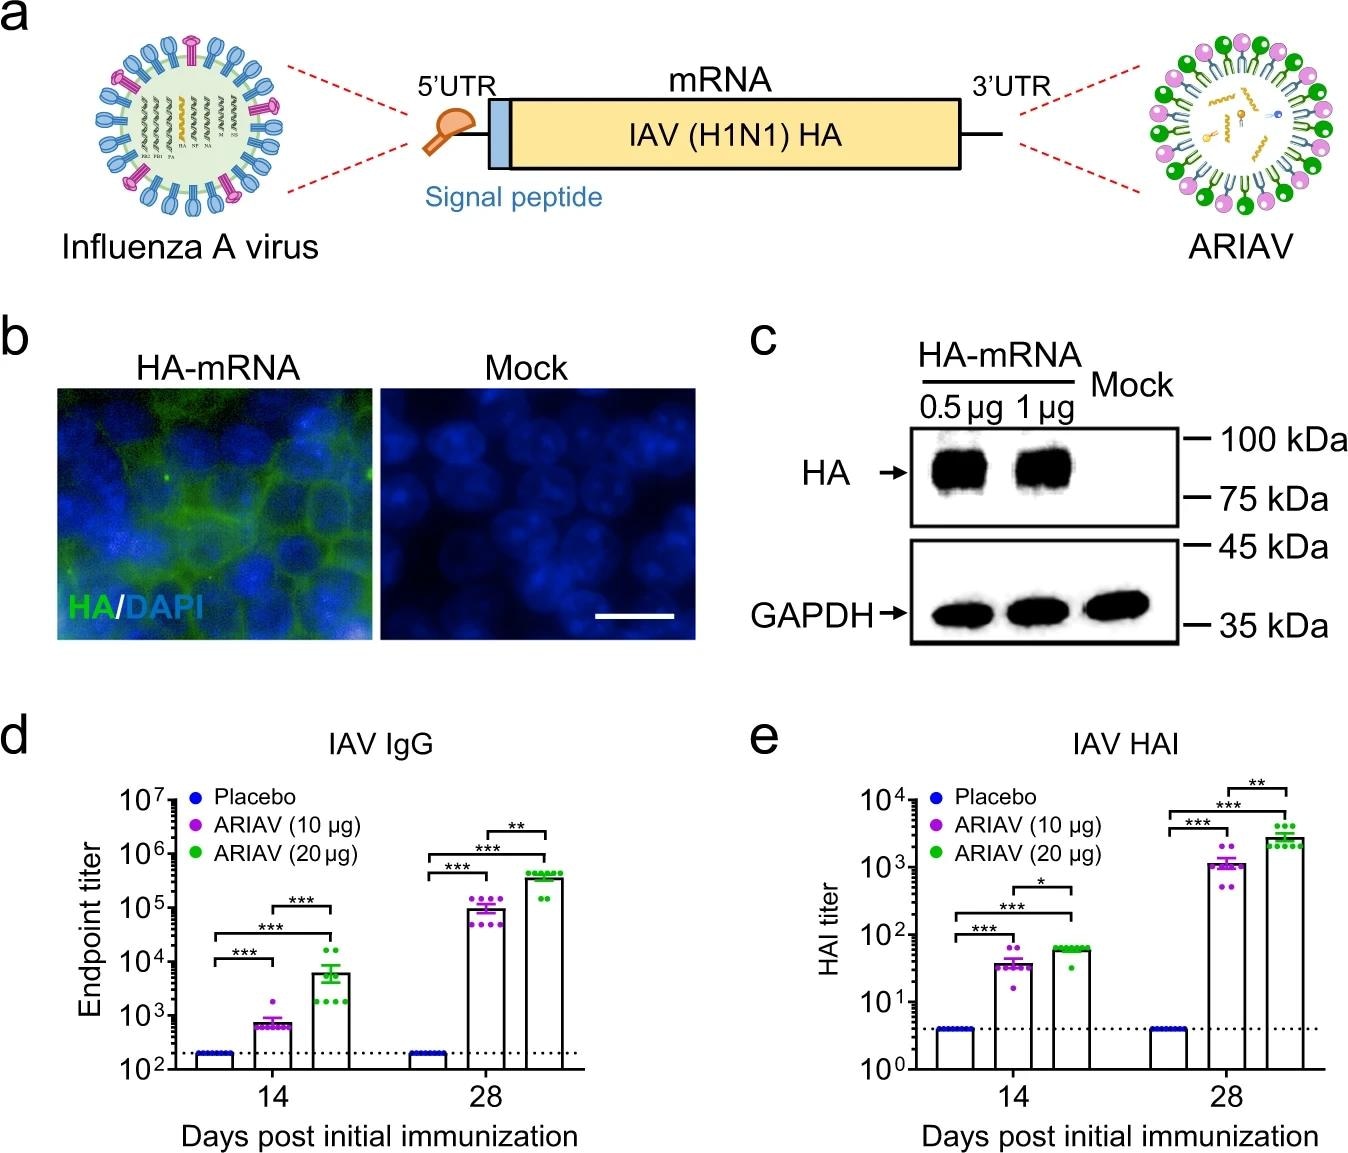 Design and characterization of ARIAV mRNA-LNP encoding HA protein of influenza A (H1N1) virus as a vaccine candidate. a Schematic diagram of ARIAV, encoding the full-length HA protein. b Indirect immunofluorescence assay of HA protein expression in HEK293T cells 48 h post-transfection. Scale bar, 20 μm. c HA expression in HEK293T cells was determined by immunoblotting. d HA-specific IgG antibody titers were determined by ELISA. e Hemagglutination inhibition (HAI) titers were determined 14 and 28 days post-initial immunization. Data are shown as the mean ± SEM (n = 8). Statistical differences were analyzed by using two-tailed unpaired t tests. *P < 0.05,**P < 0.01, ***P < 0.001.